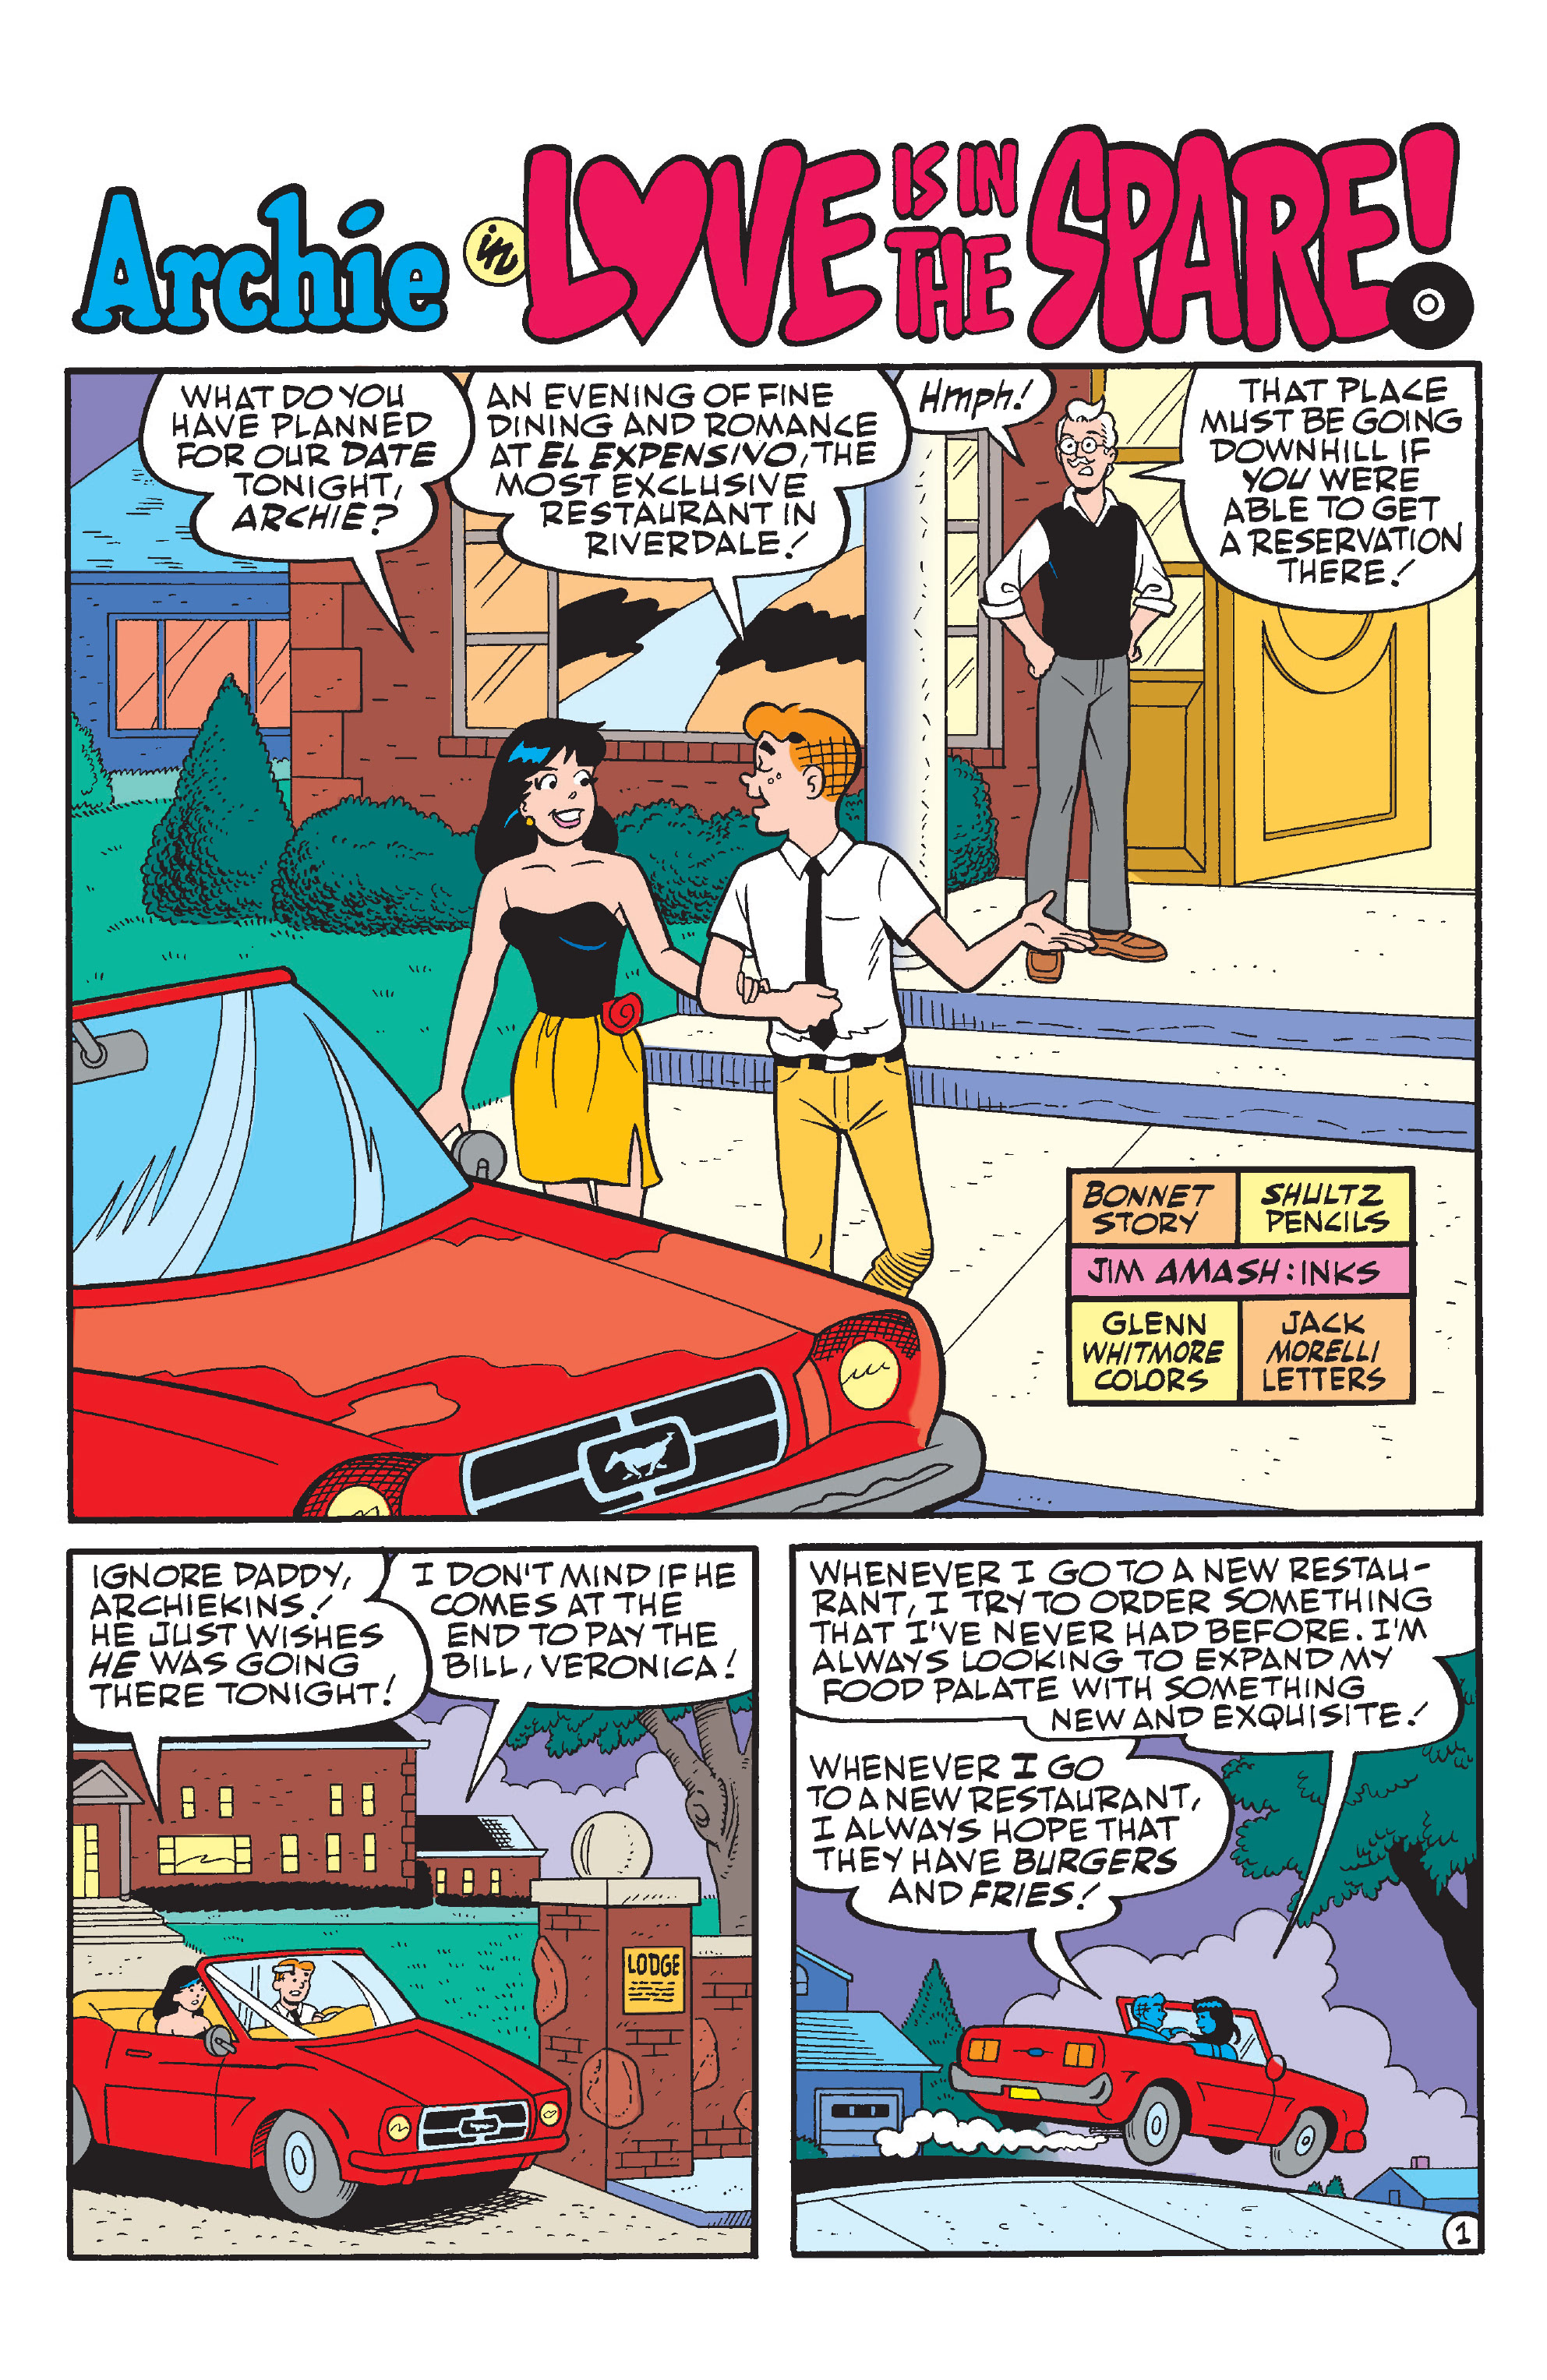 Archie & Friends: Guide to Dating (2021): Chapter 1 - Page 3